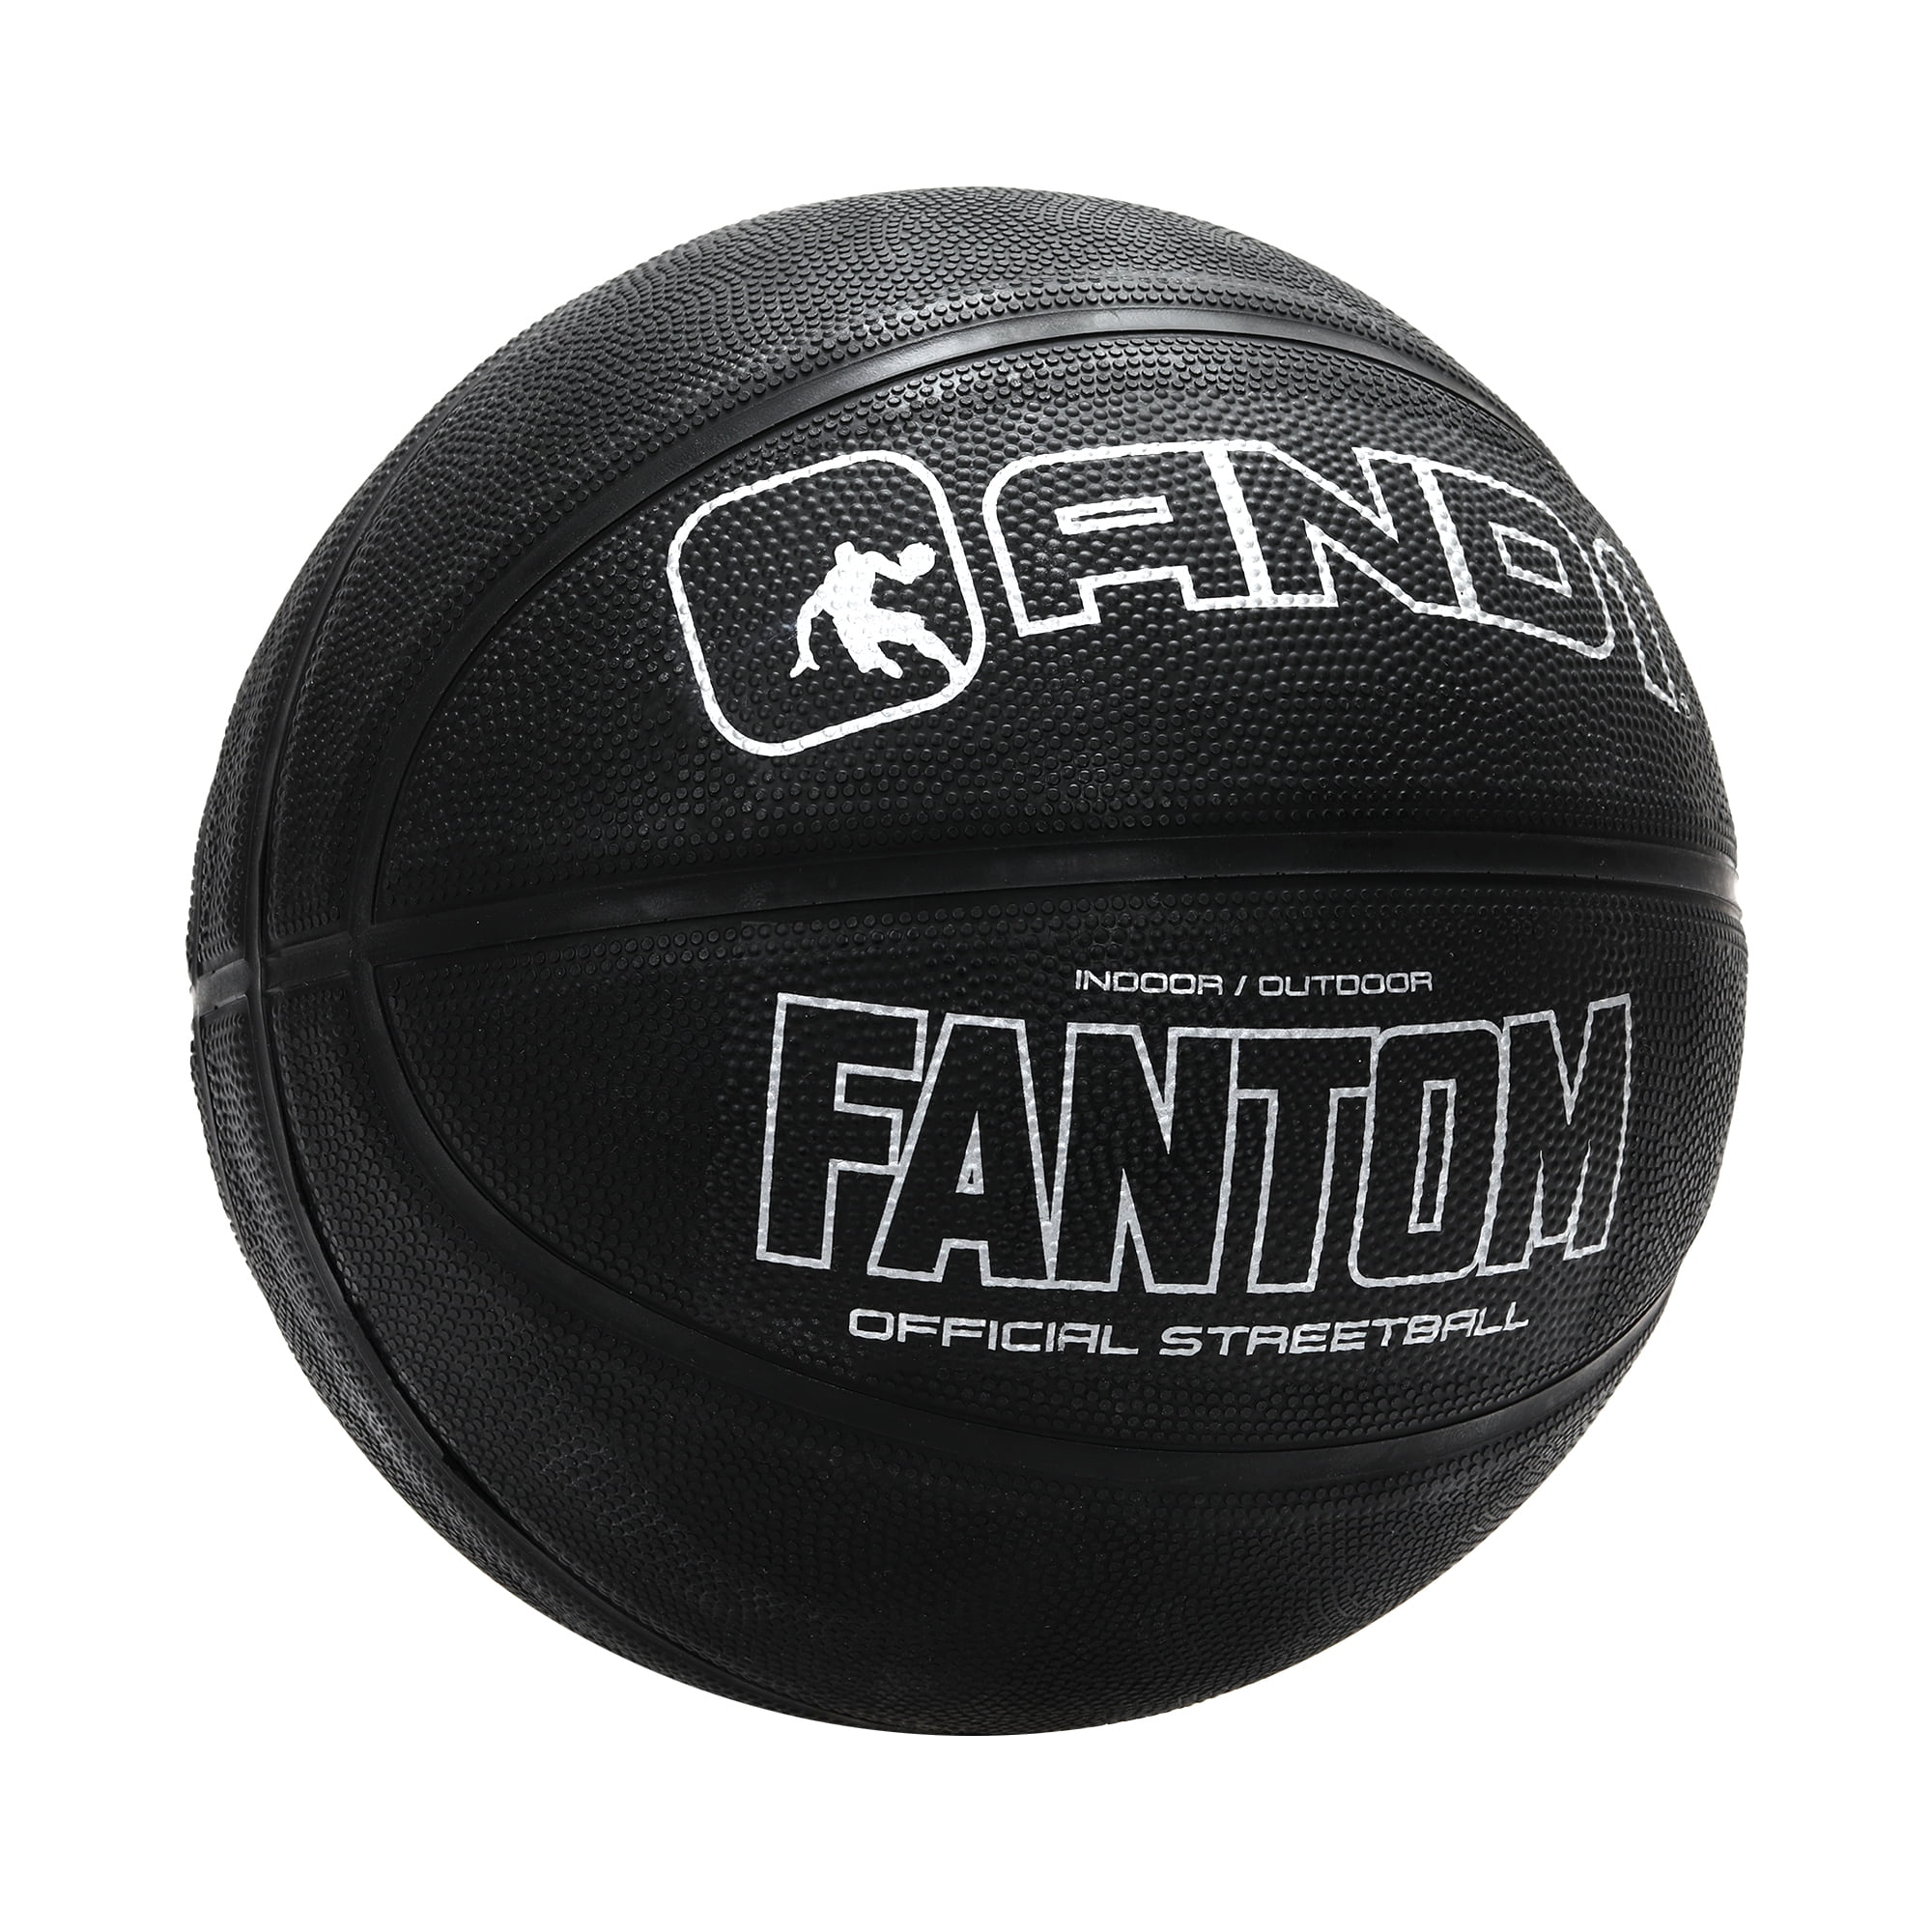 This basketball that has been sprayed with Vanta black : r/interestingasfuck